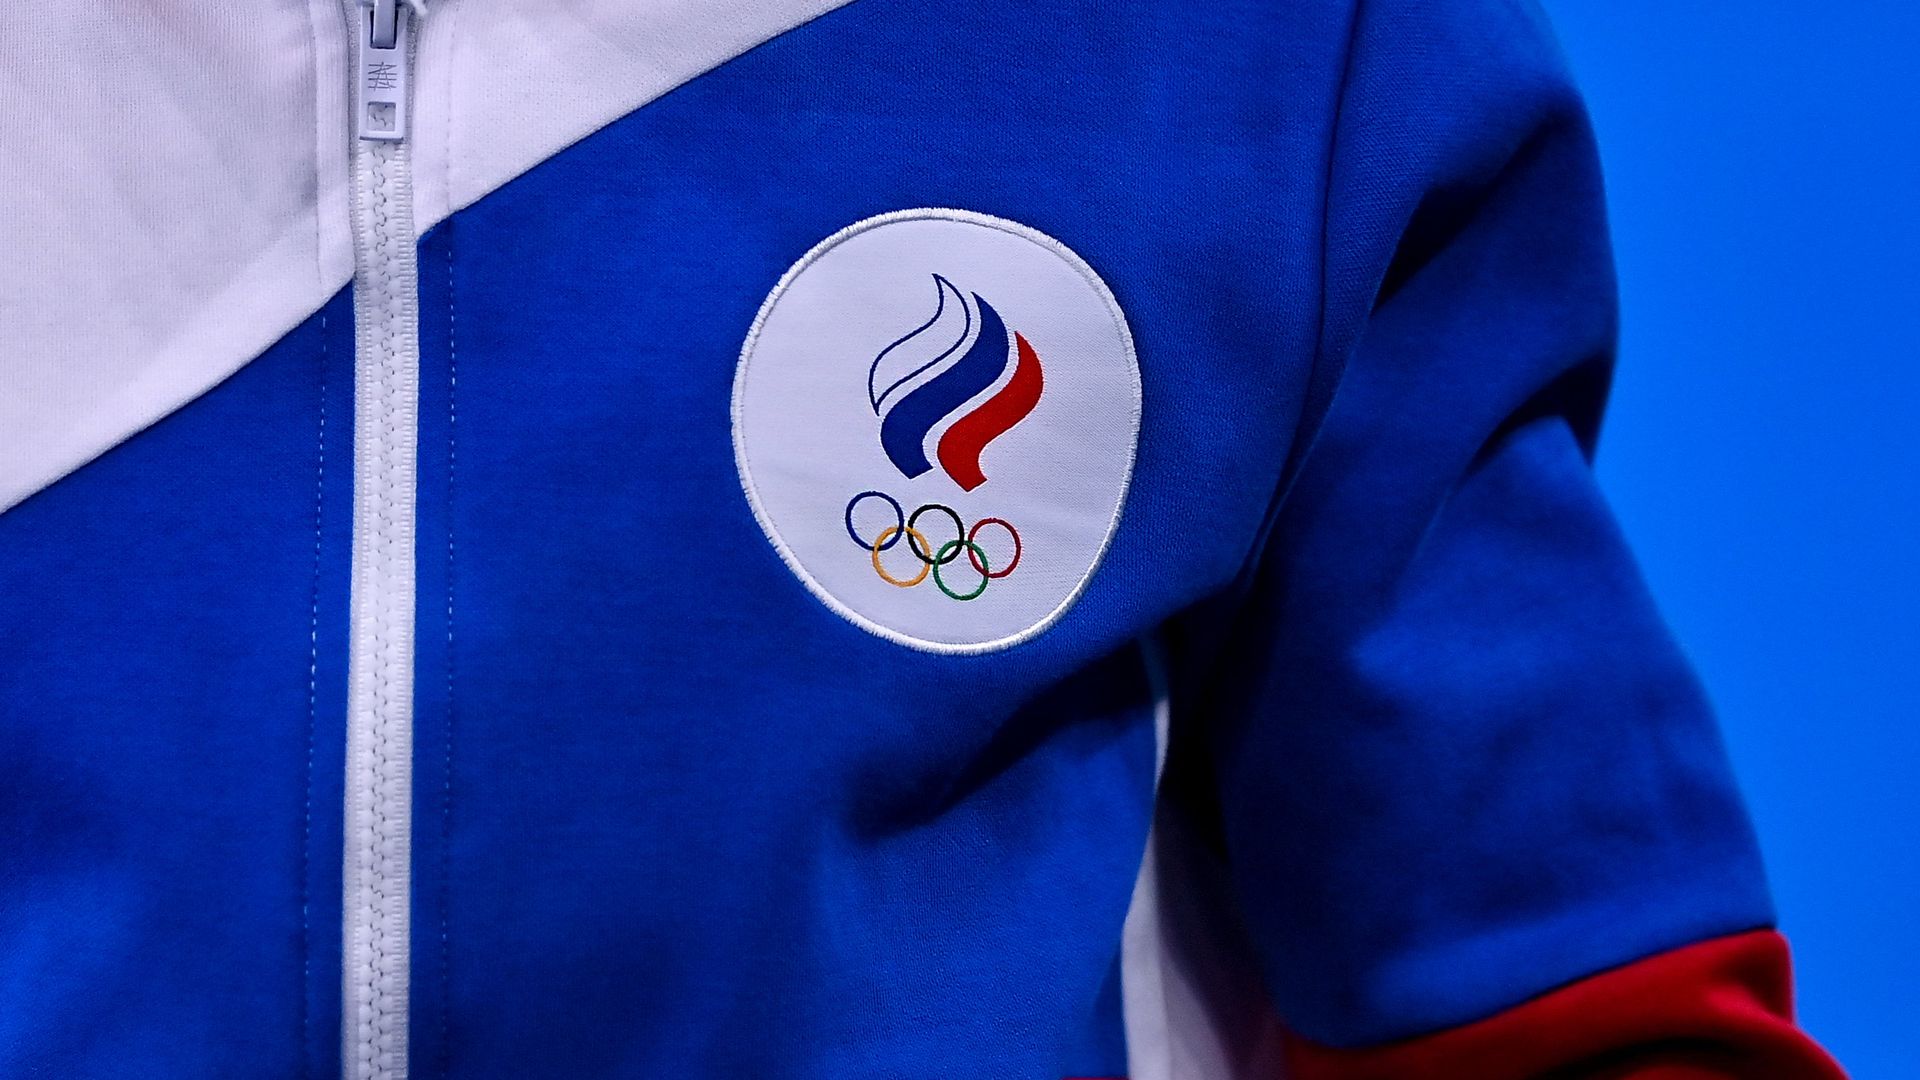 The logo of the Russian Olympic Committee team on a uniform during women's gymnastics at the 2020 Olympics in Tokyo.